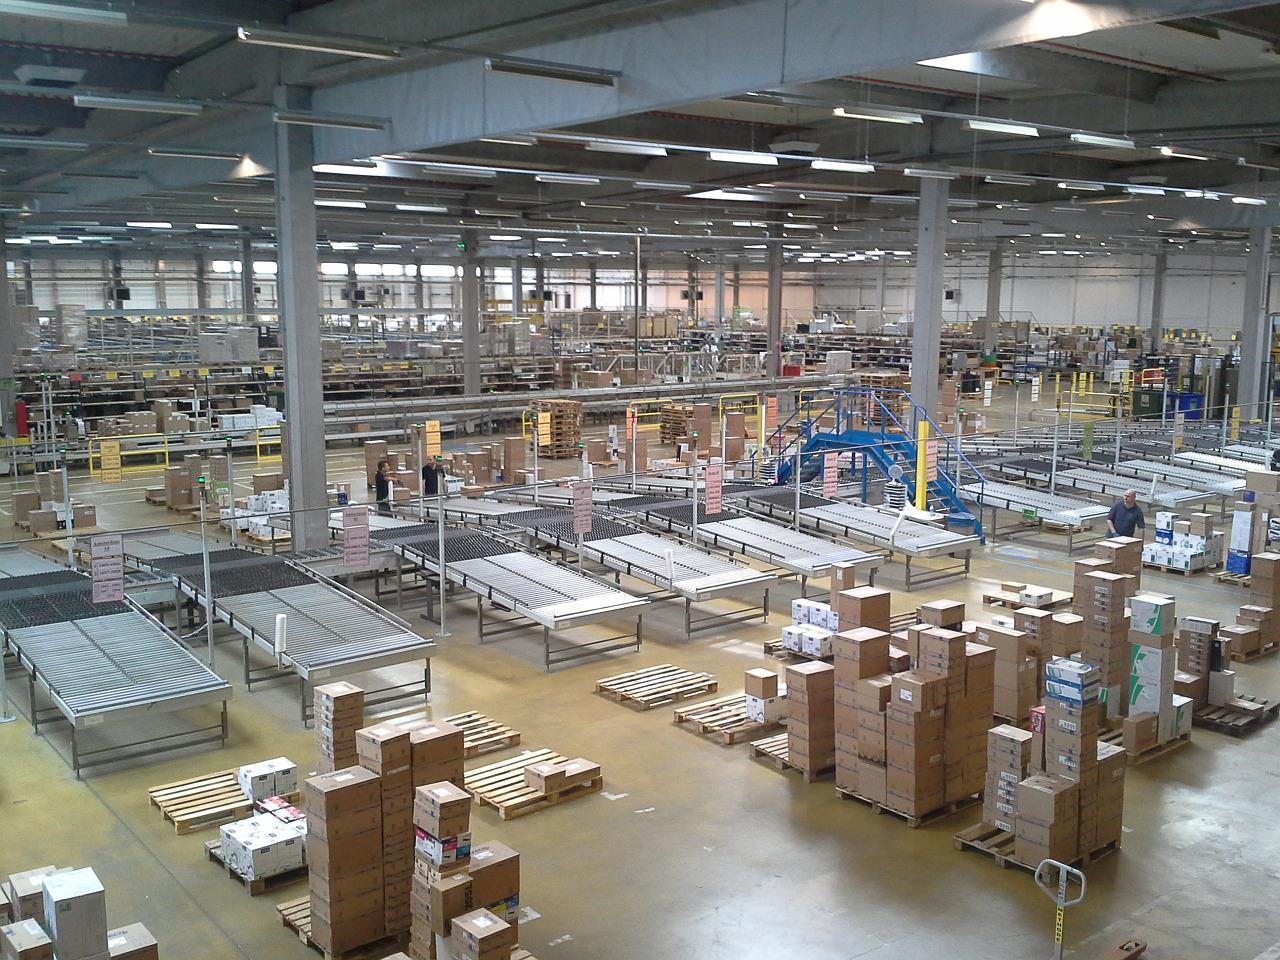 A factory with lots of boxes but no people to be seen